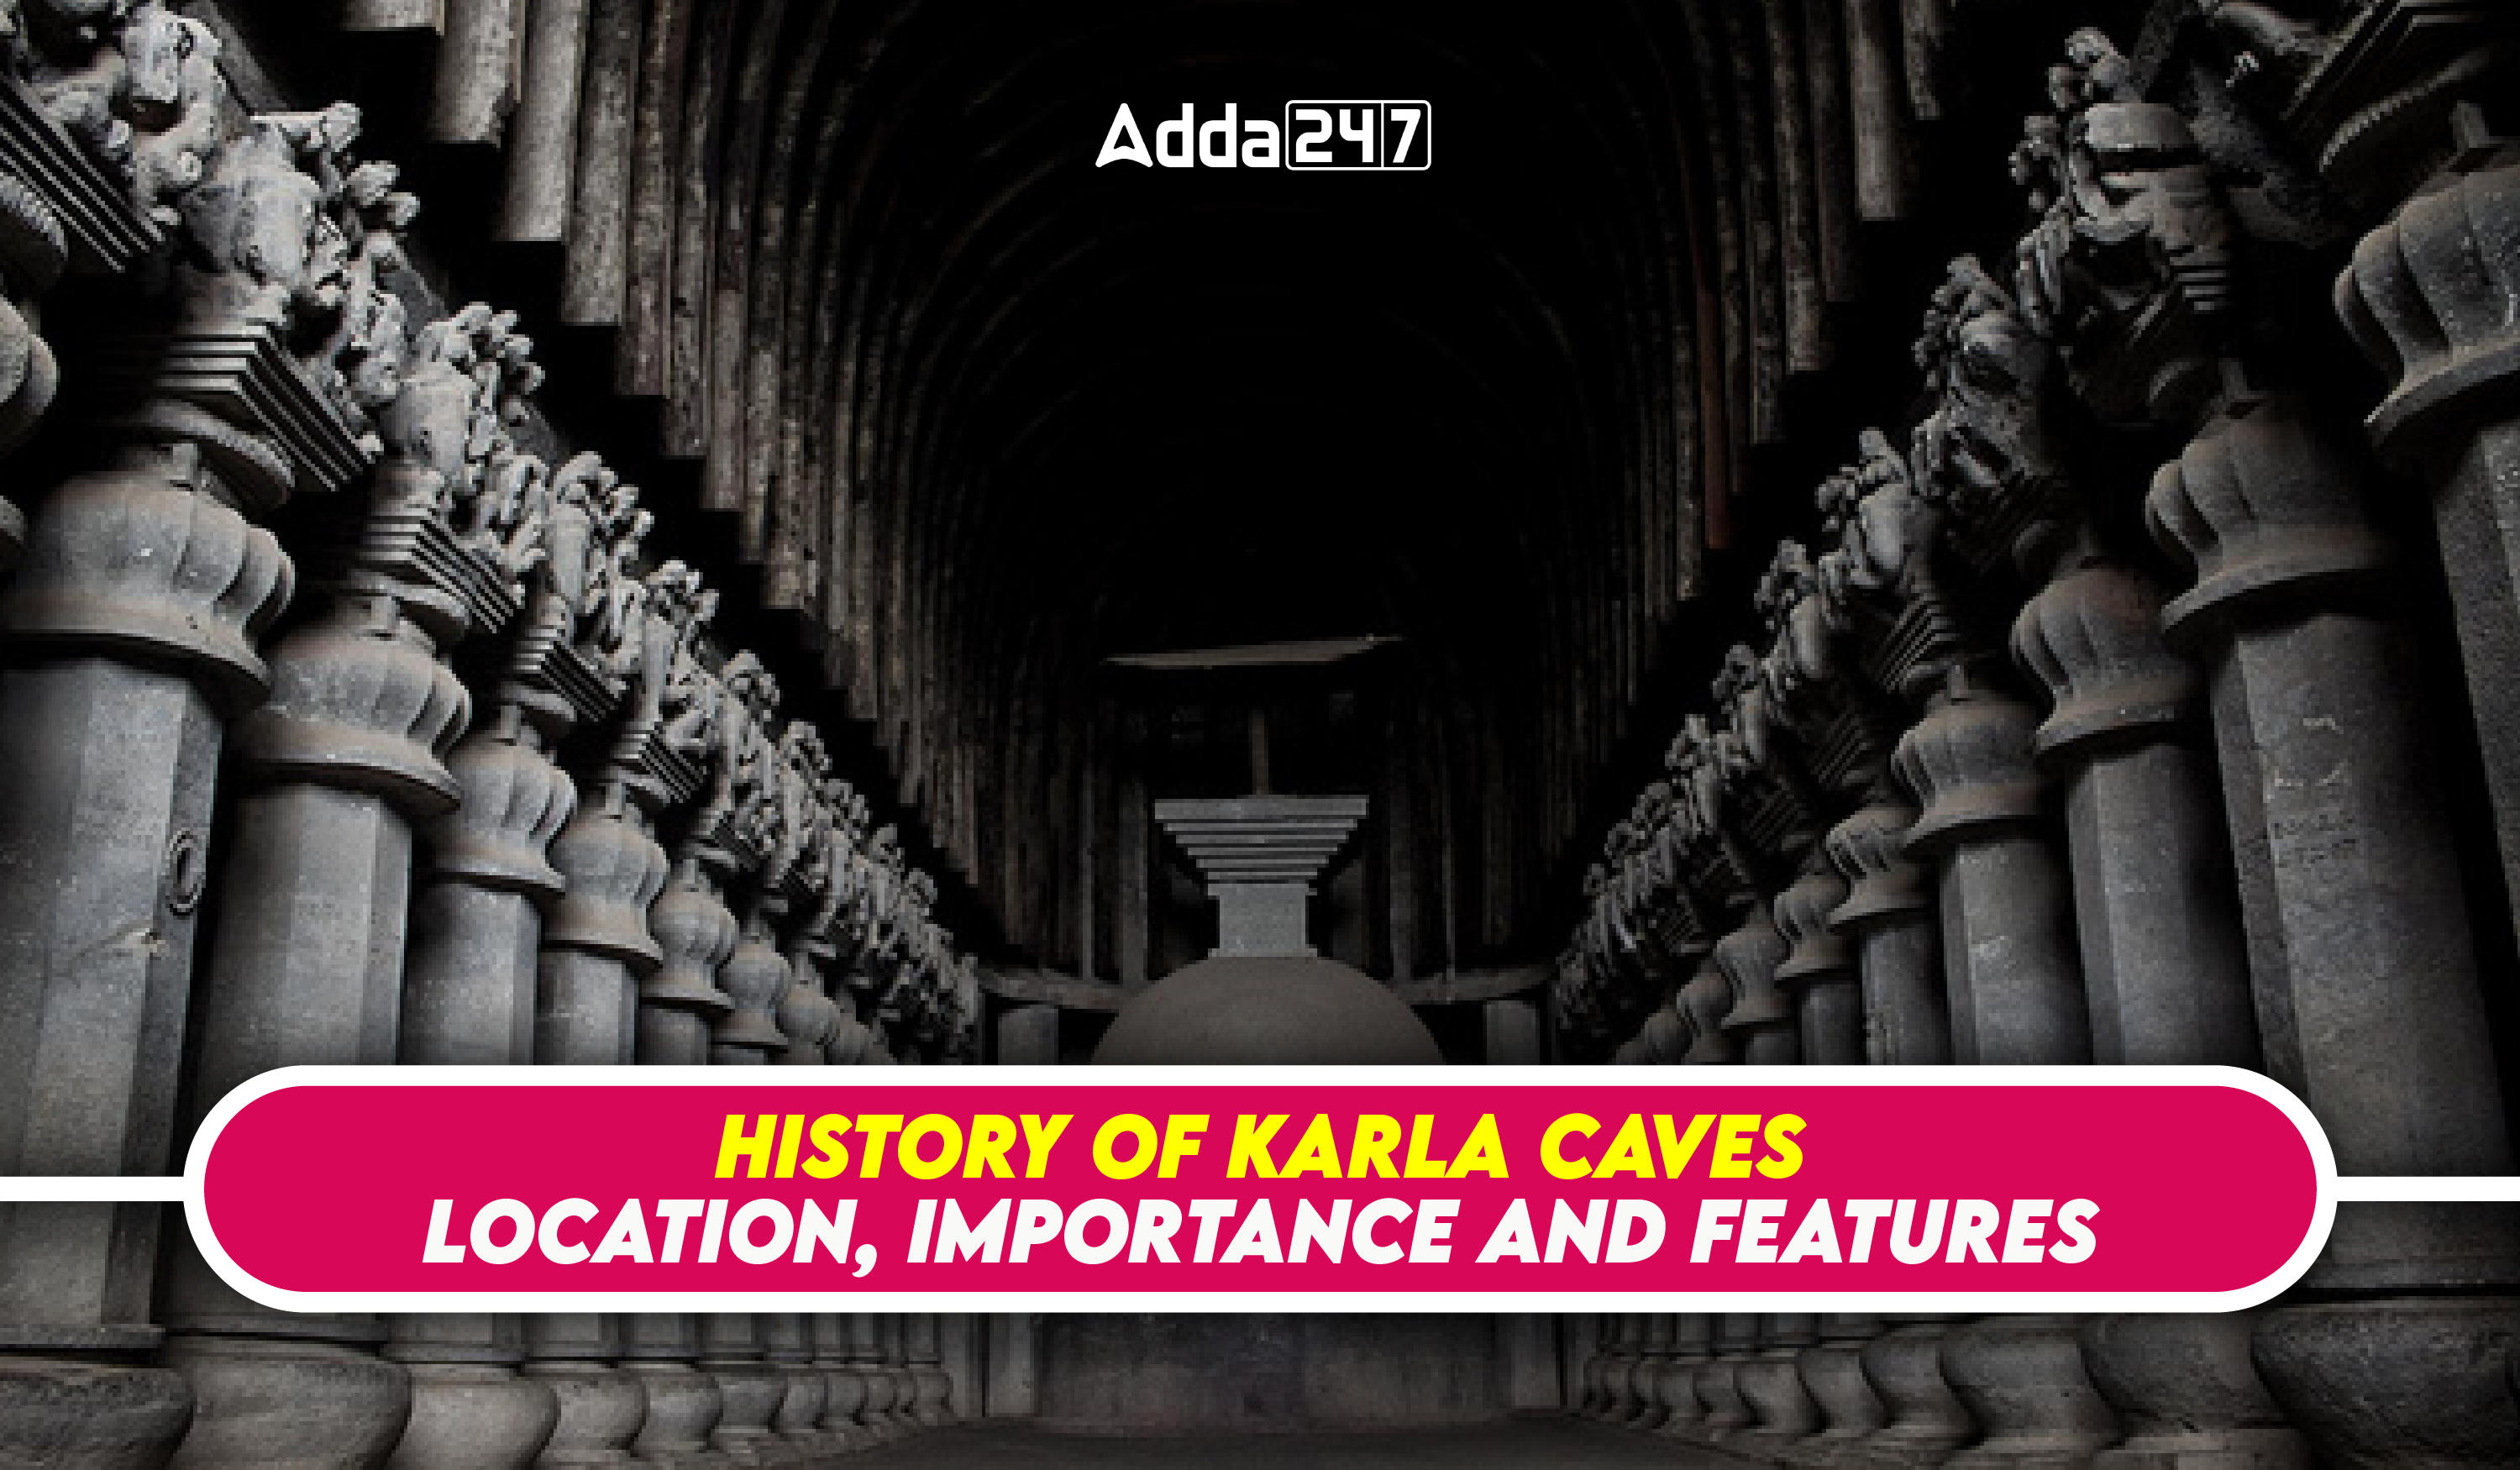 History of Karla Caves